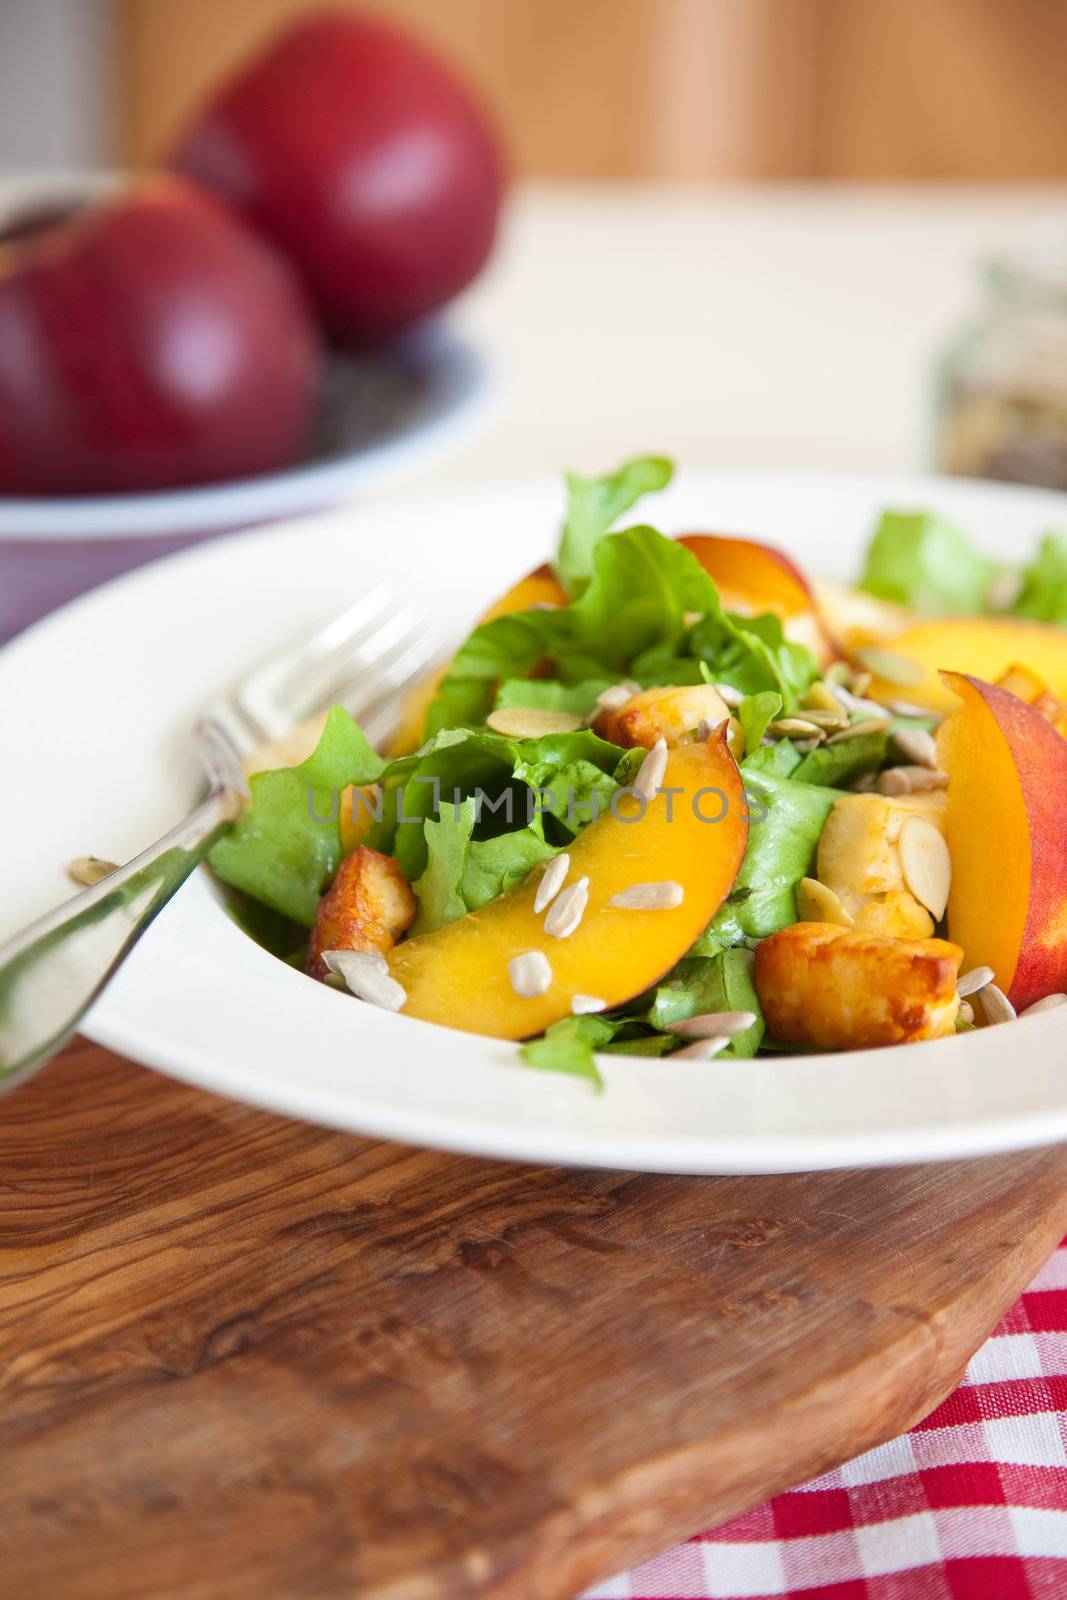 Healthy and delicious salad with endive, haloumi and nectarines